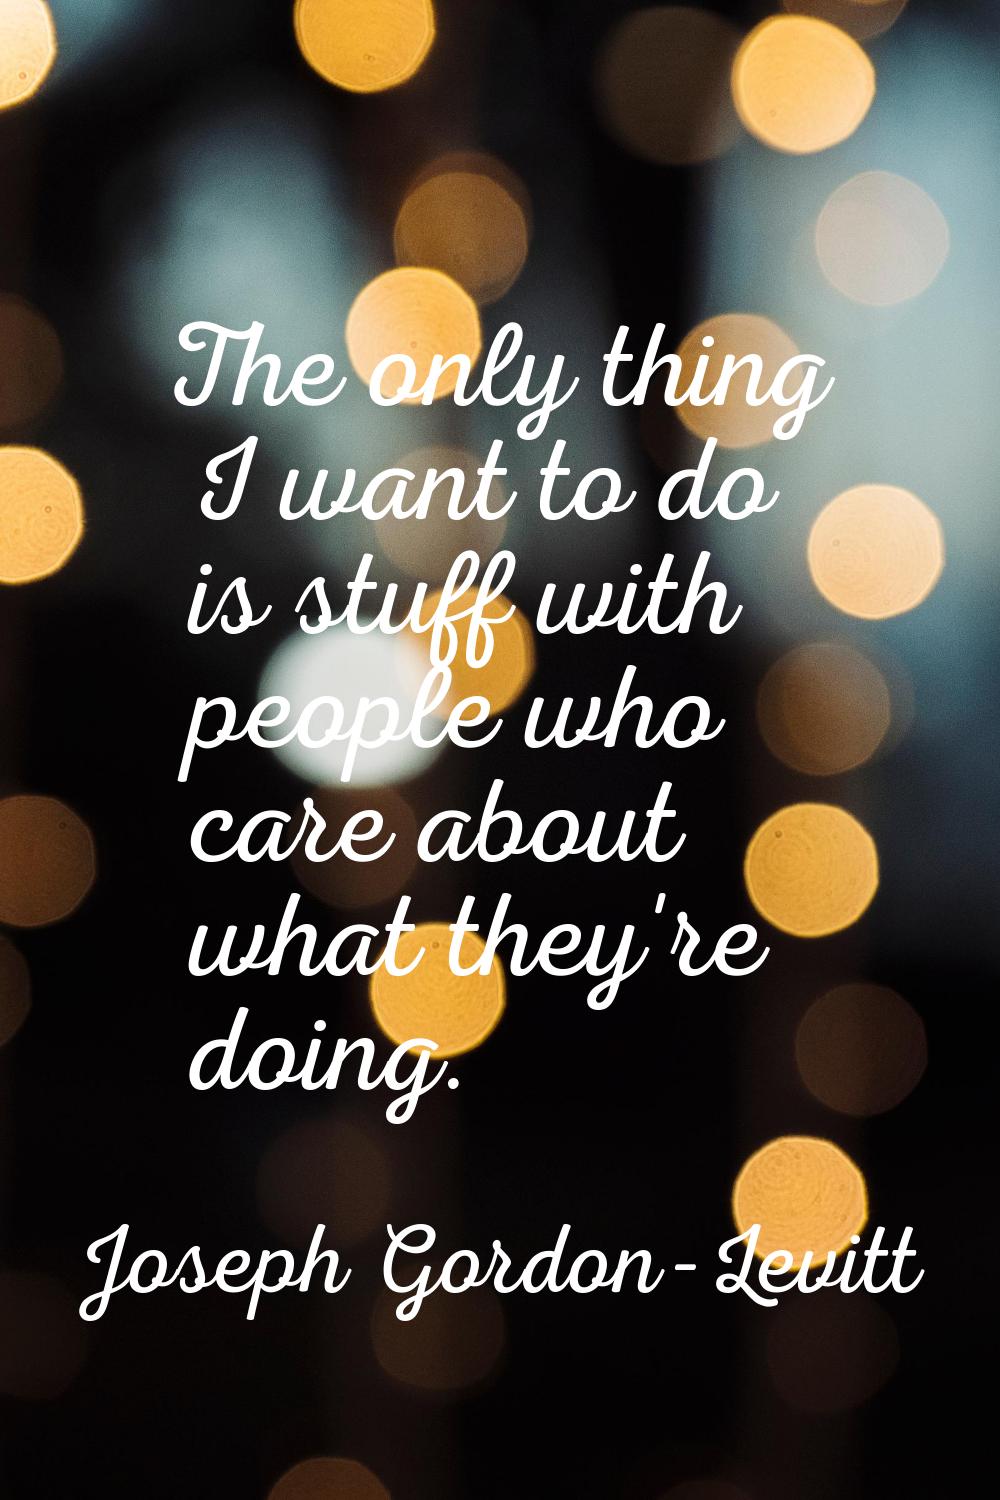 The only thing I want to do is stuff with people who care about what they're doing.